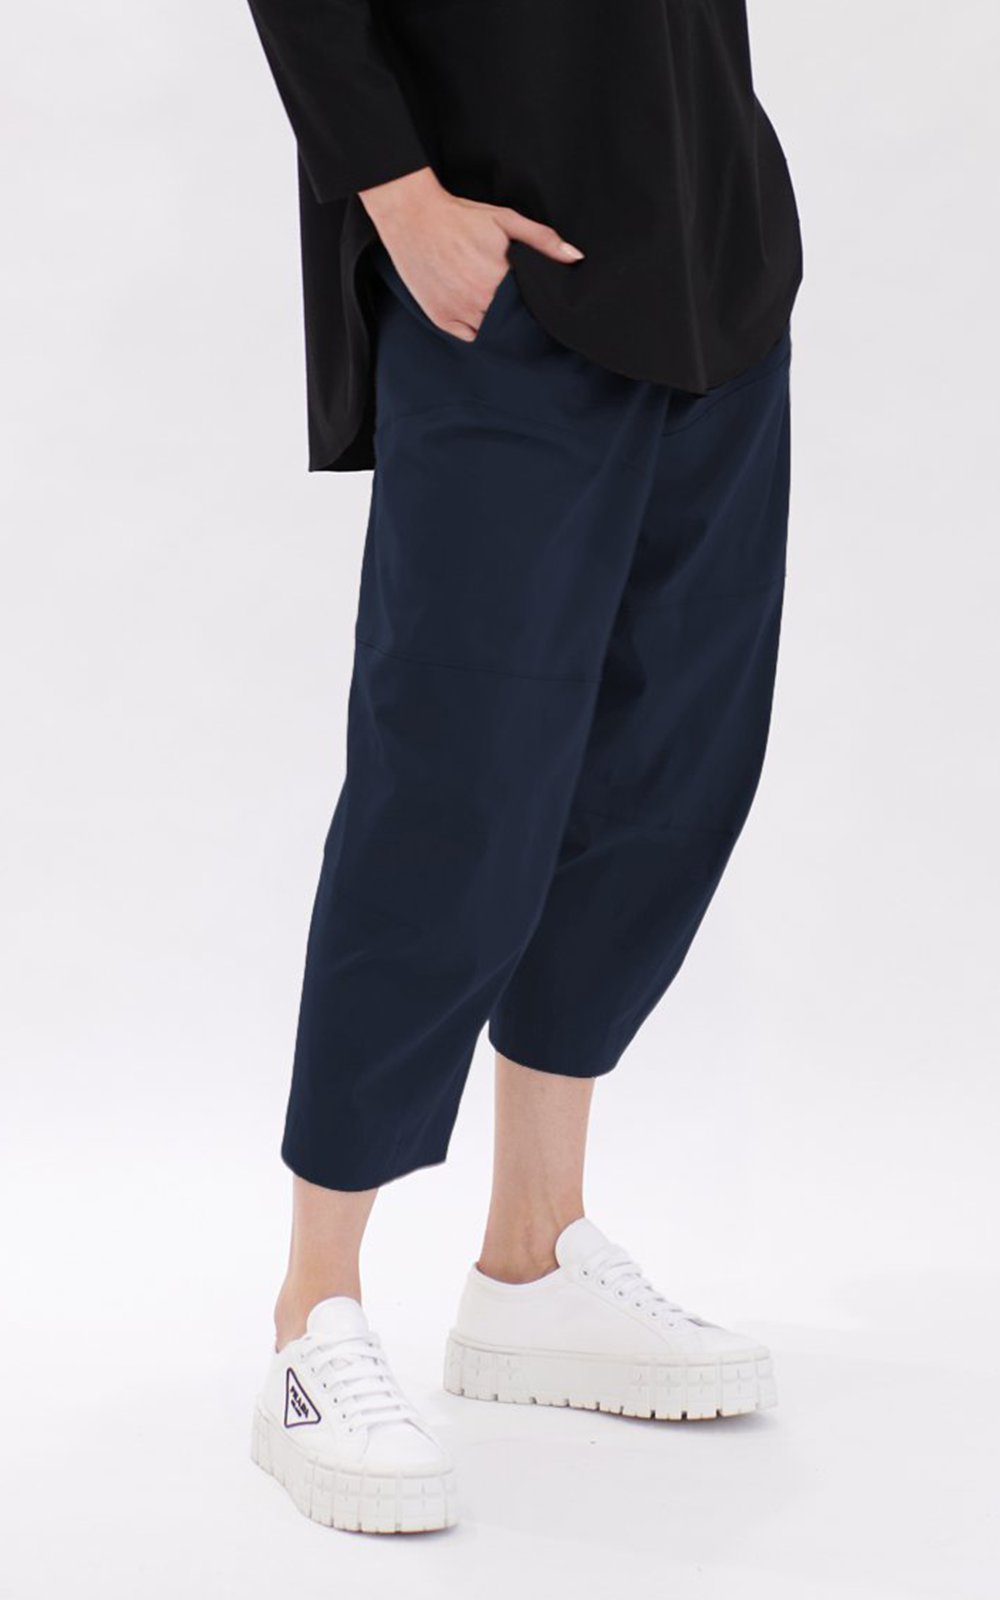 Cropped Tuscan Pant product photo.